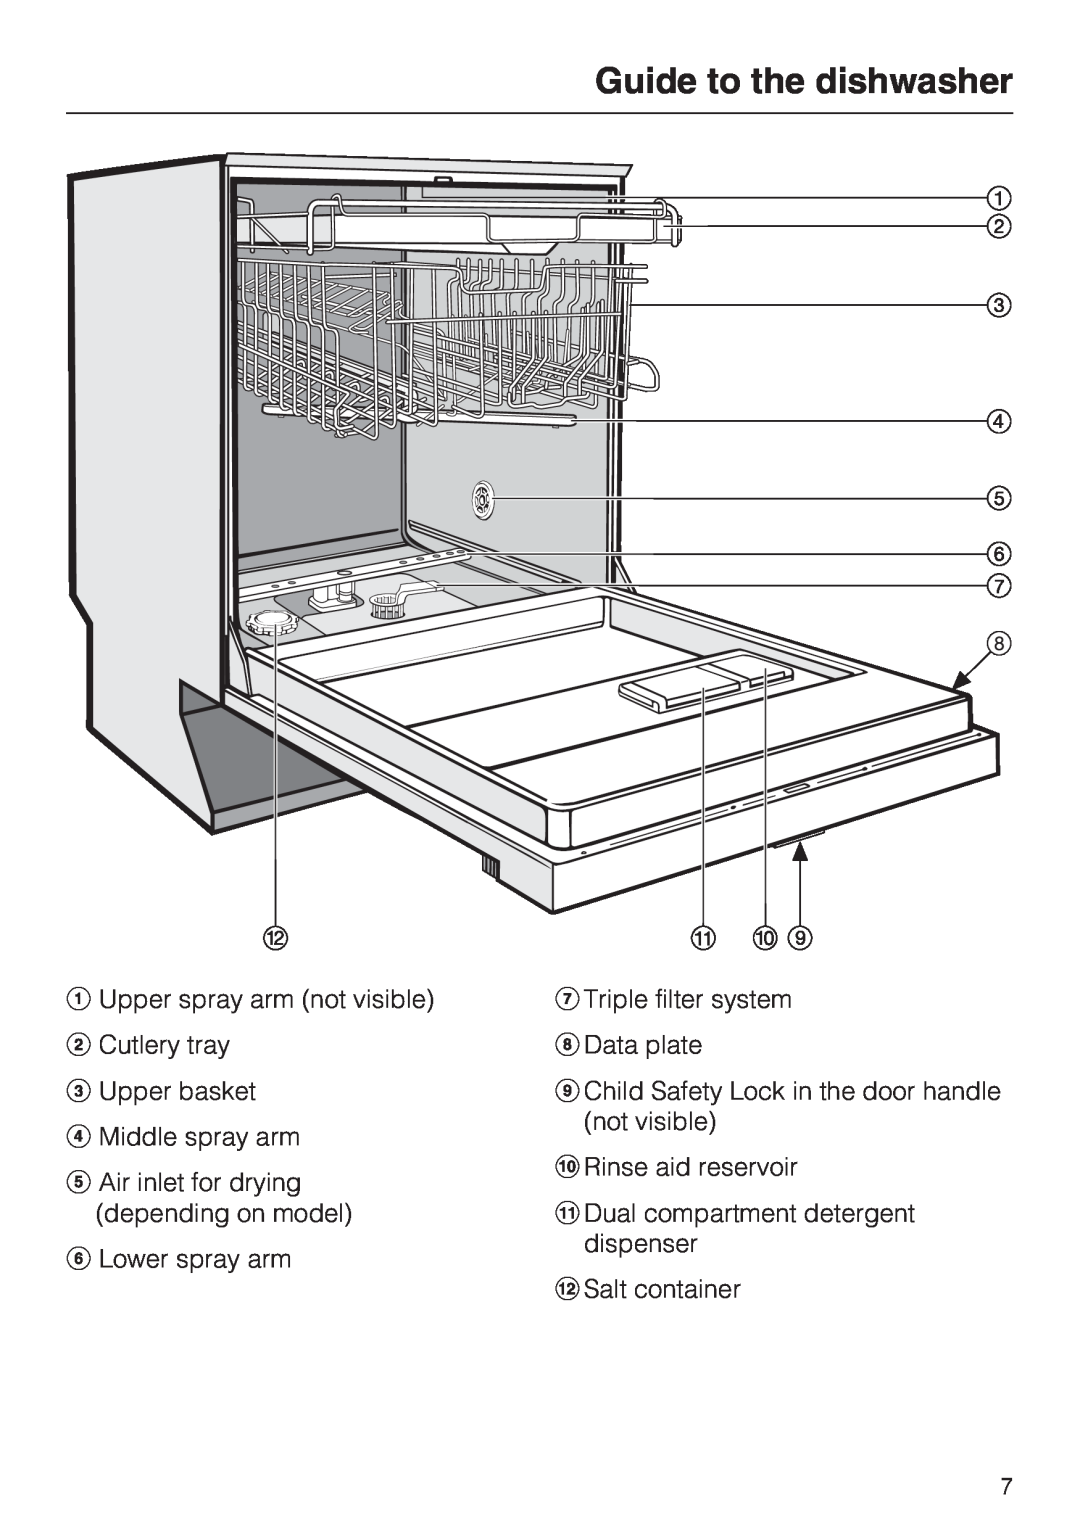 Miele G 5220, G 5225 Guide to the dishwasher, Upper spray arm not visible Cutlery tray, Upper basket Middle spray arm 